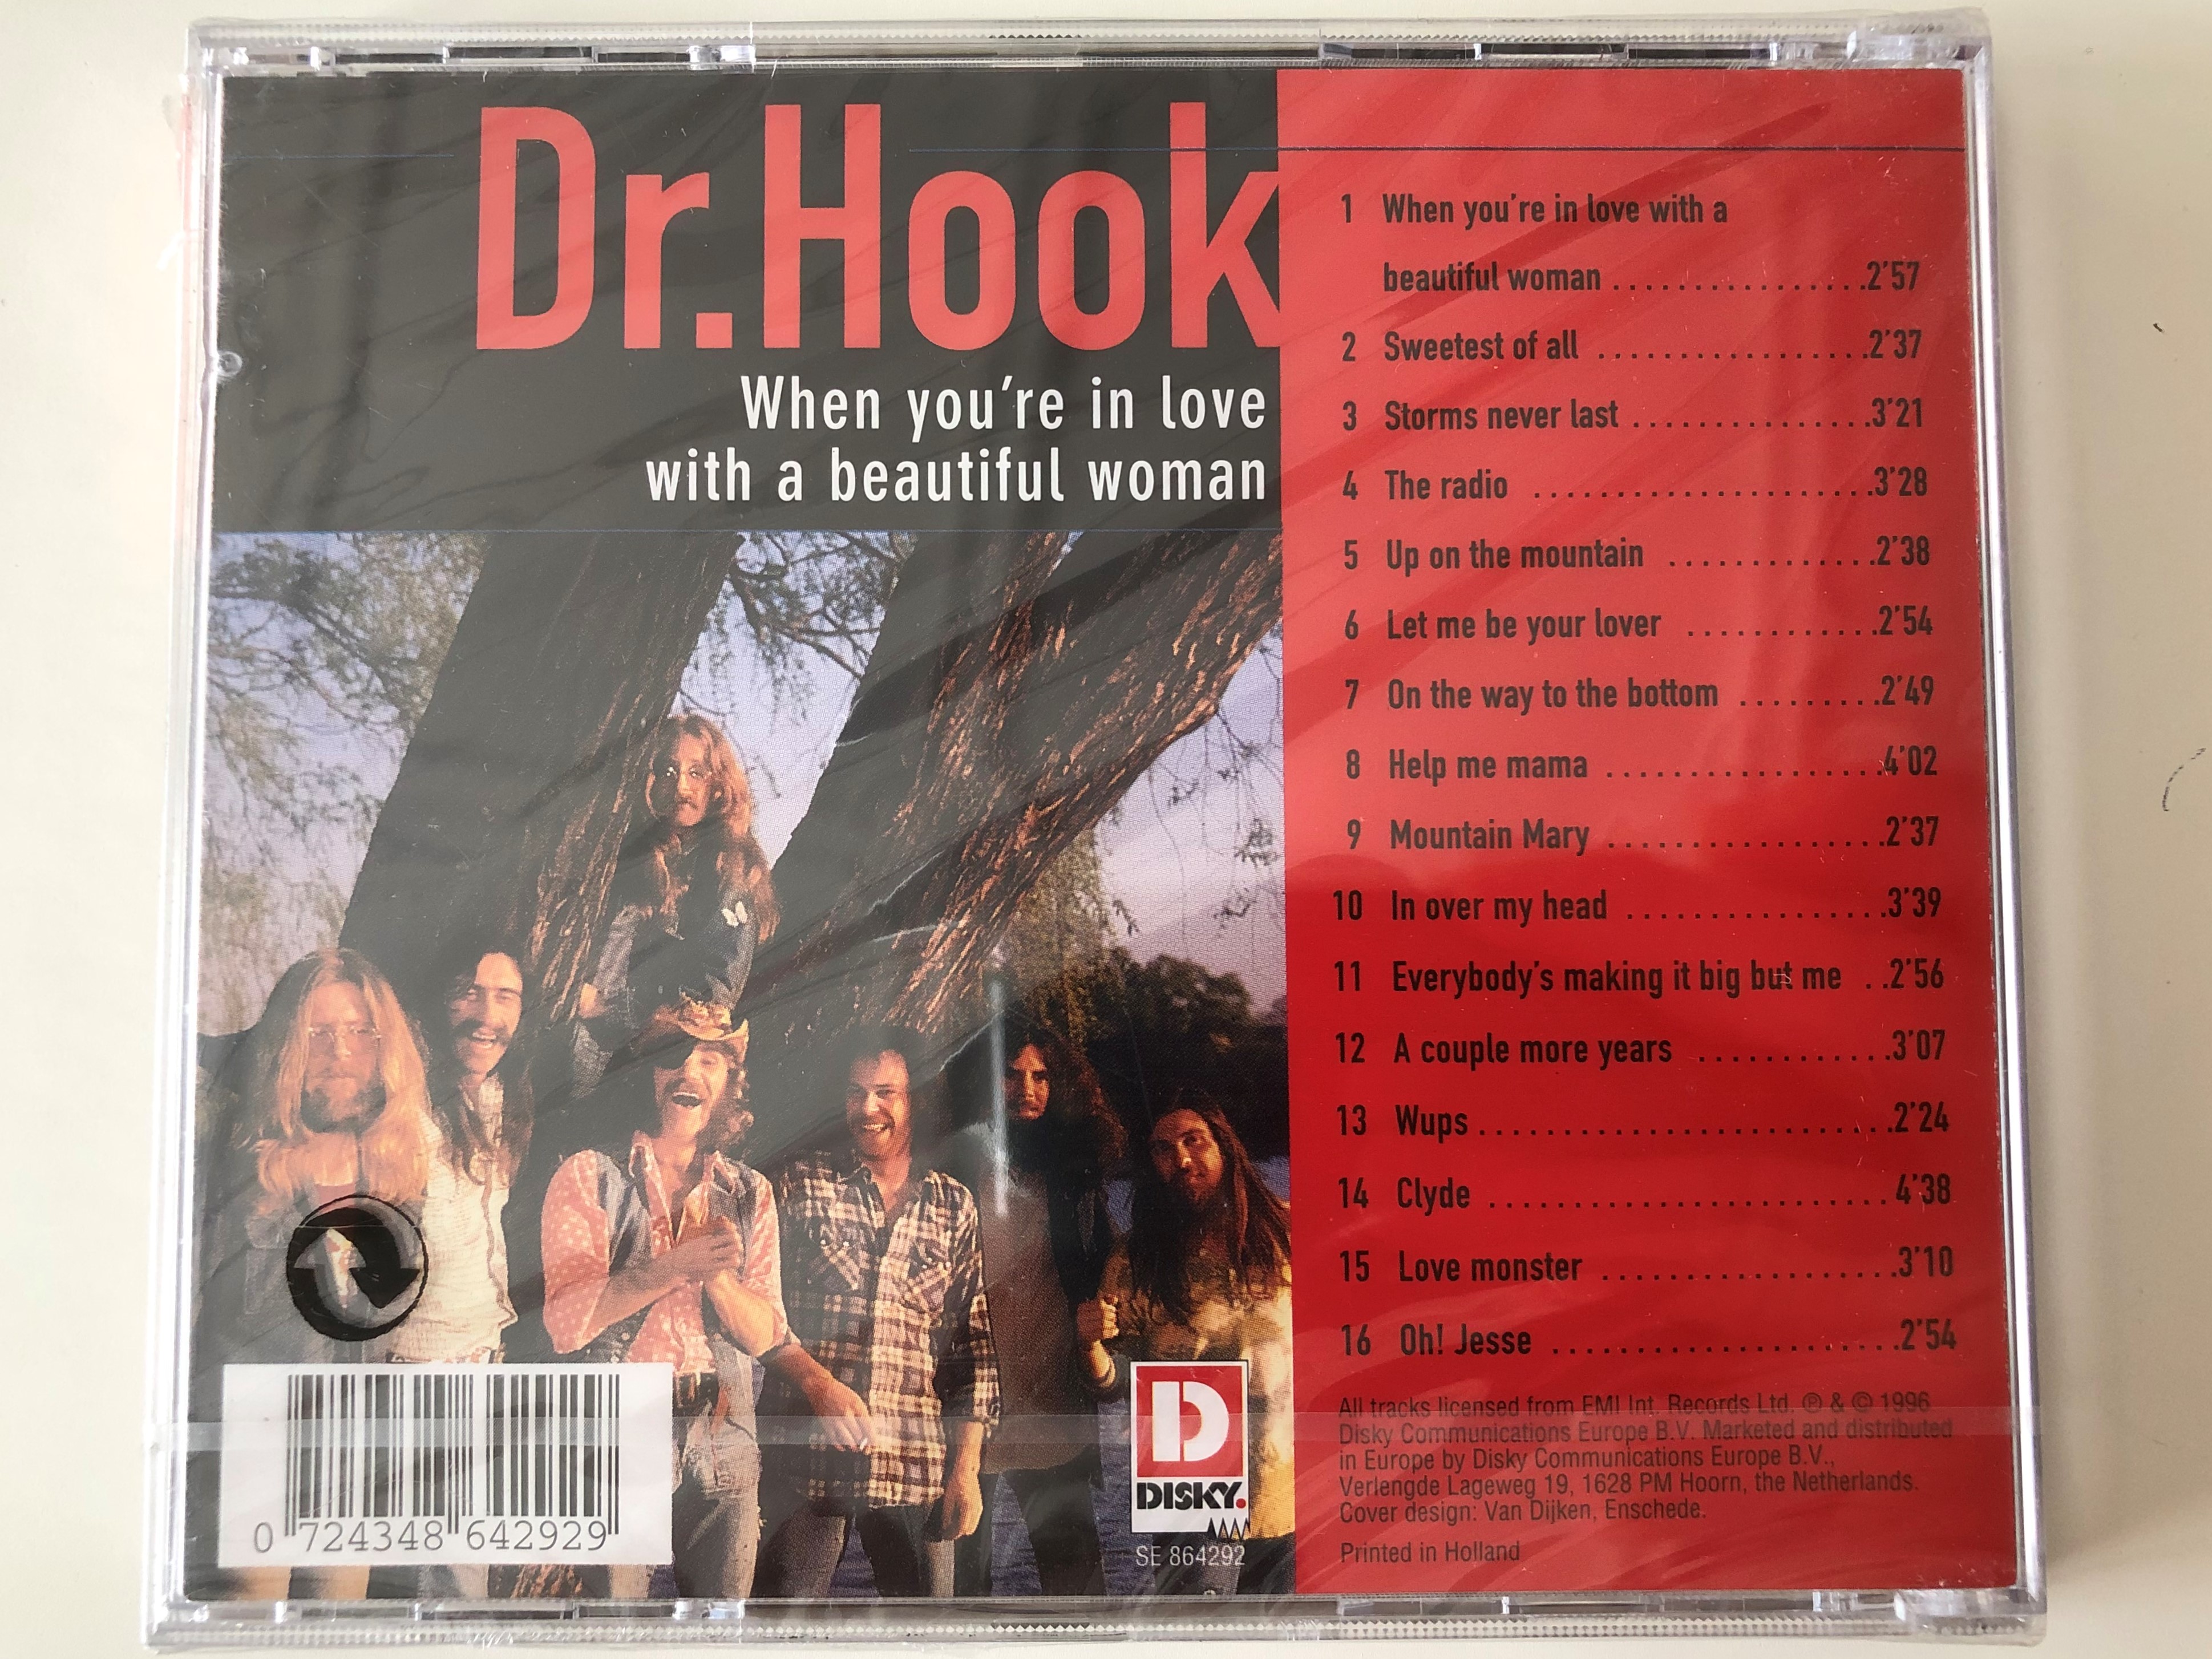 dr.-hook-when-you-re-in-love-with-a-beautiful-woman-sweetest-of-all-everybody-s-making-it-big-but-me-a-couple-more-years-disky-audio-cd-1996-se-864292-2-.jpg